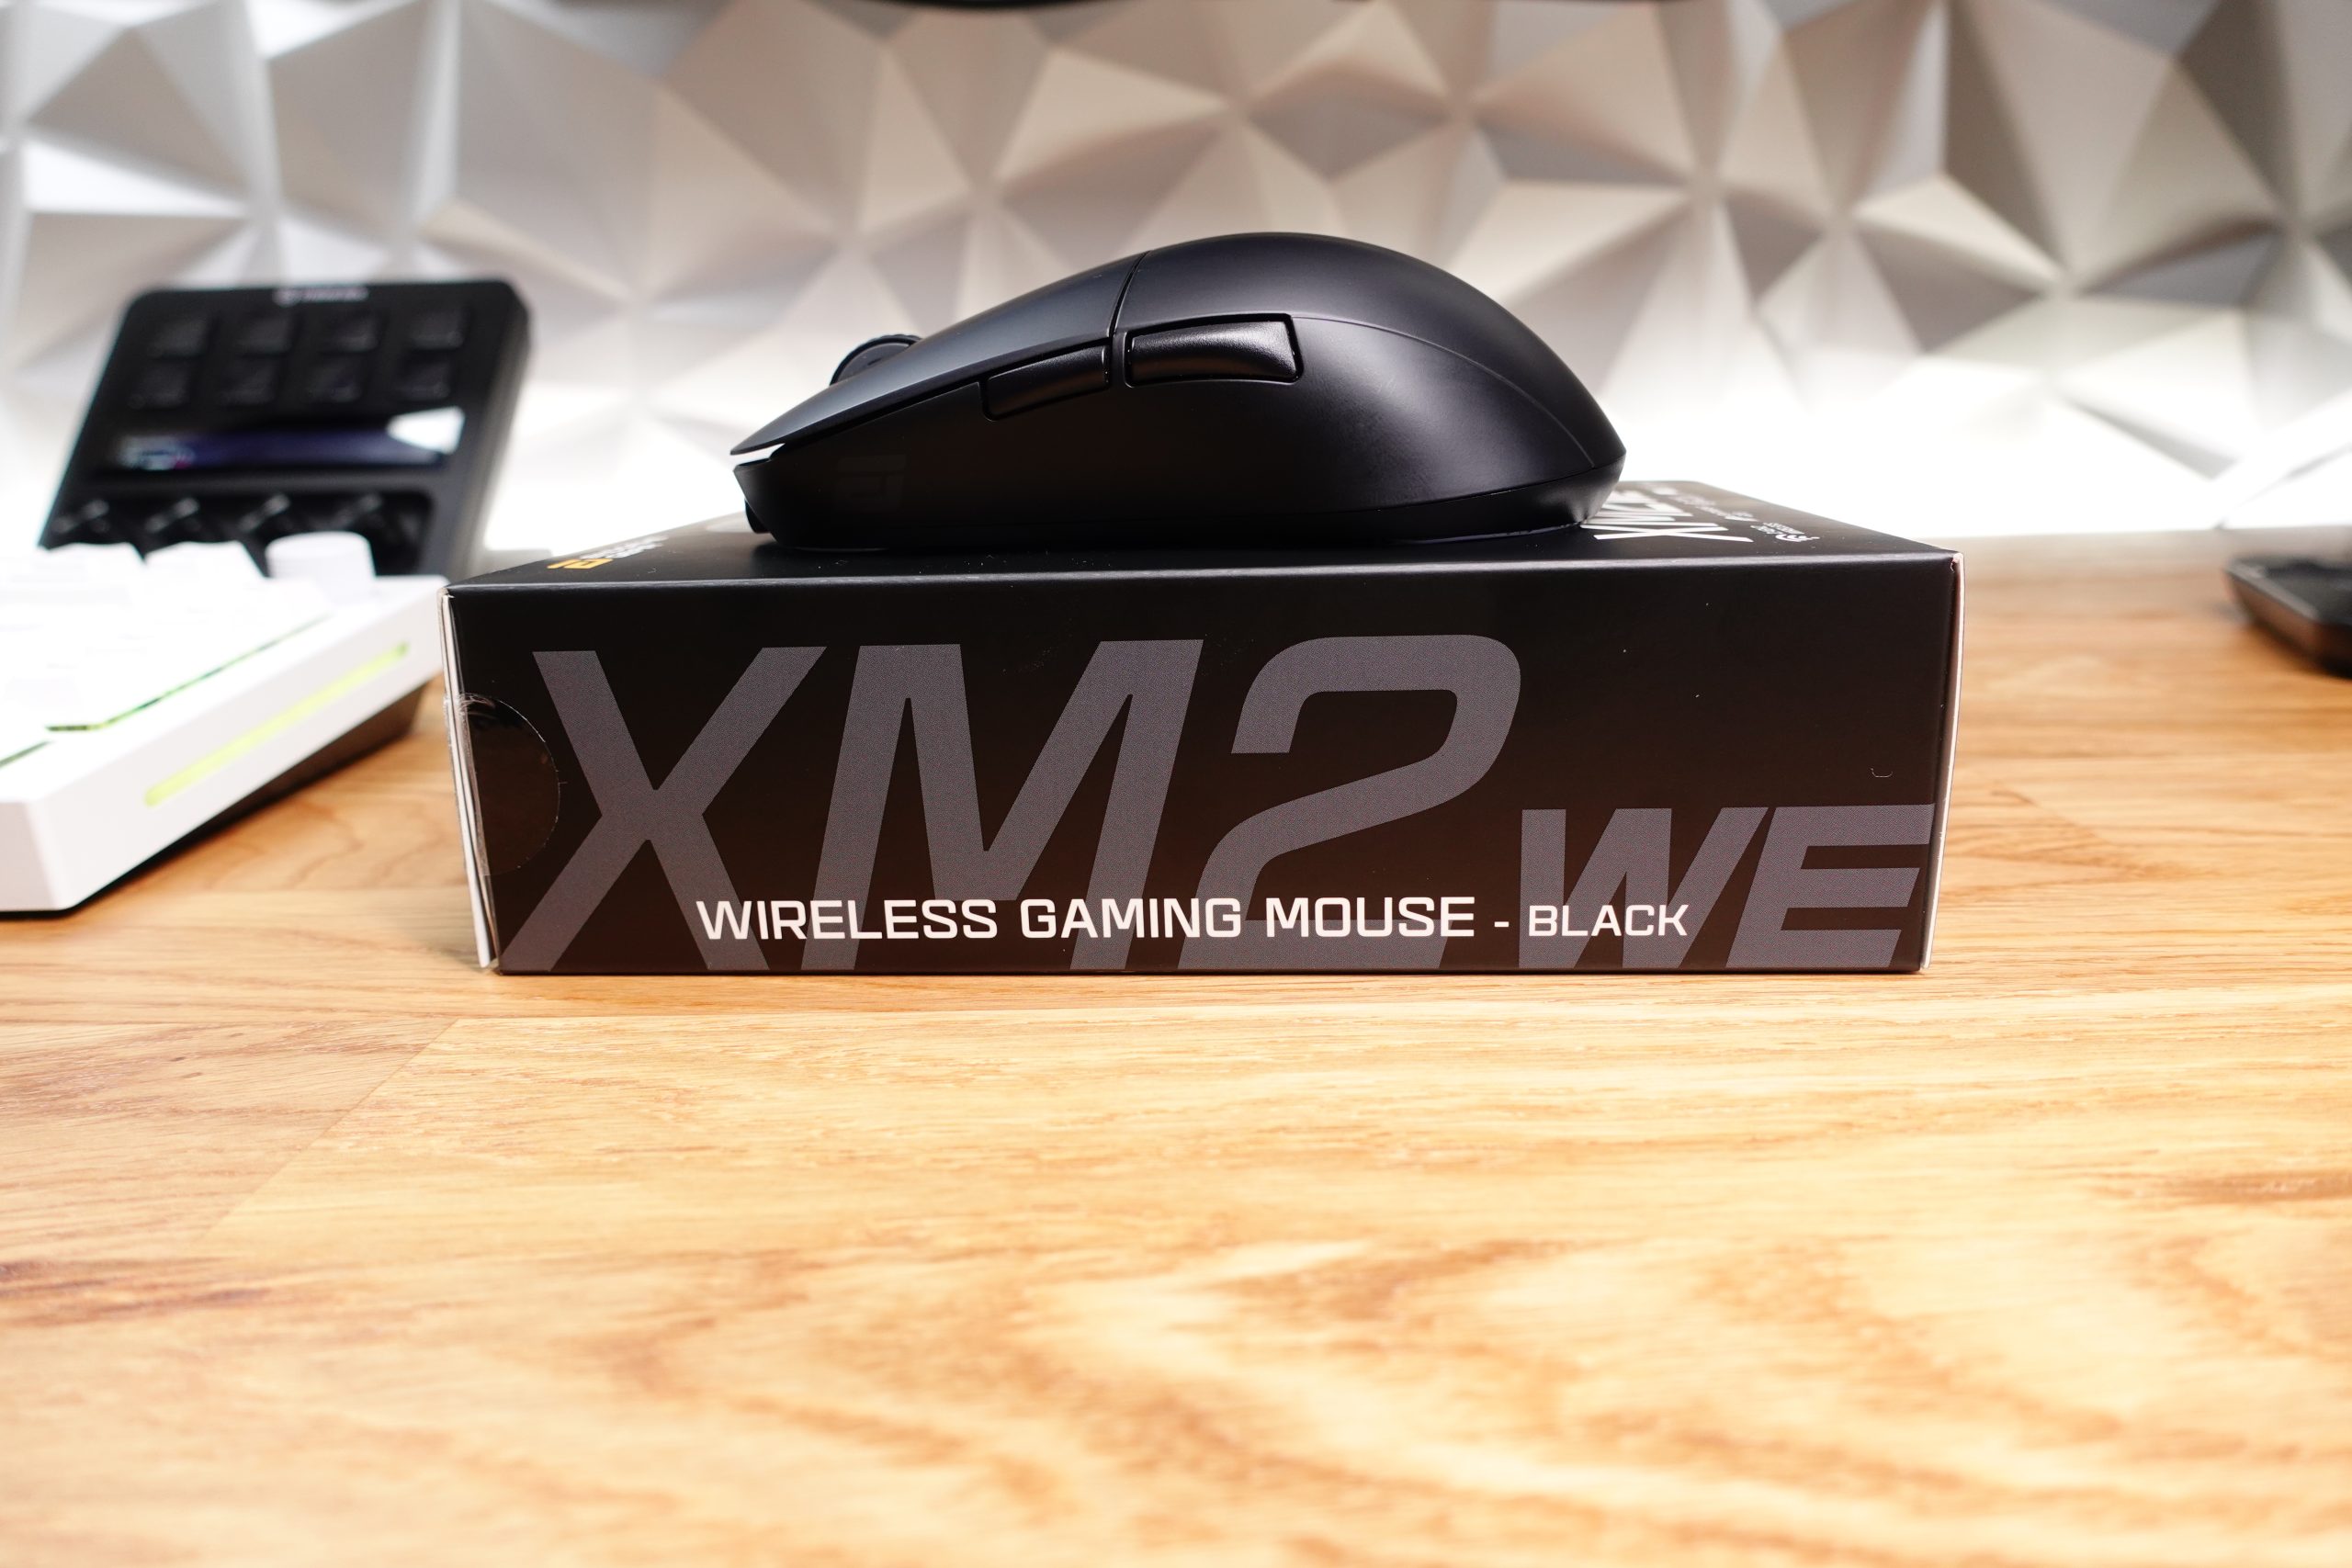 Endgame Gear XM2WE Gaming Mouse Review 